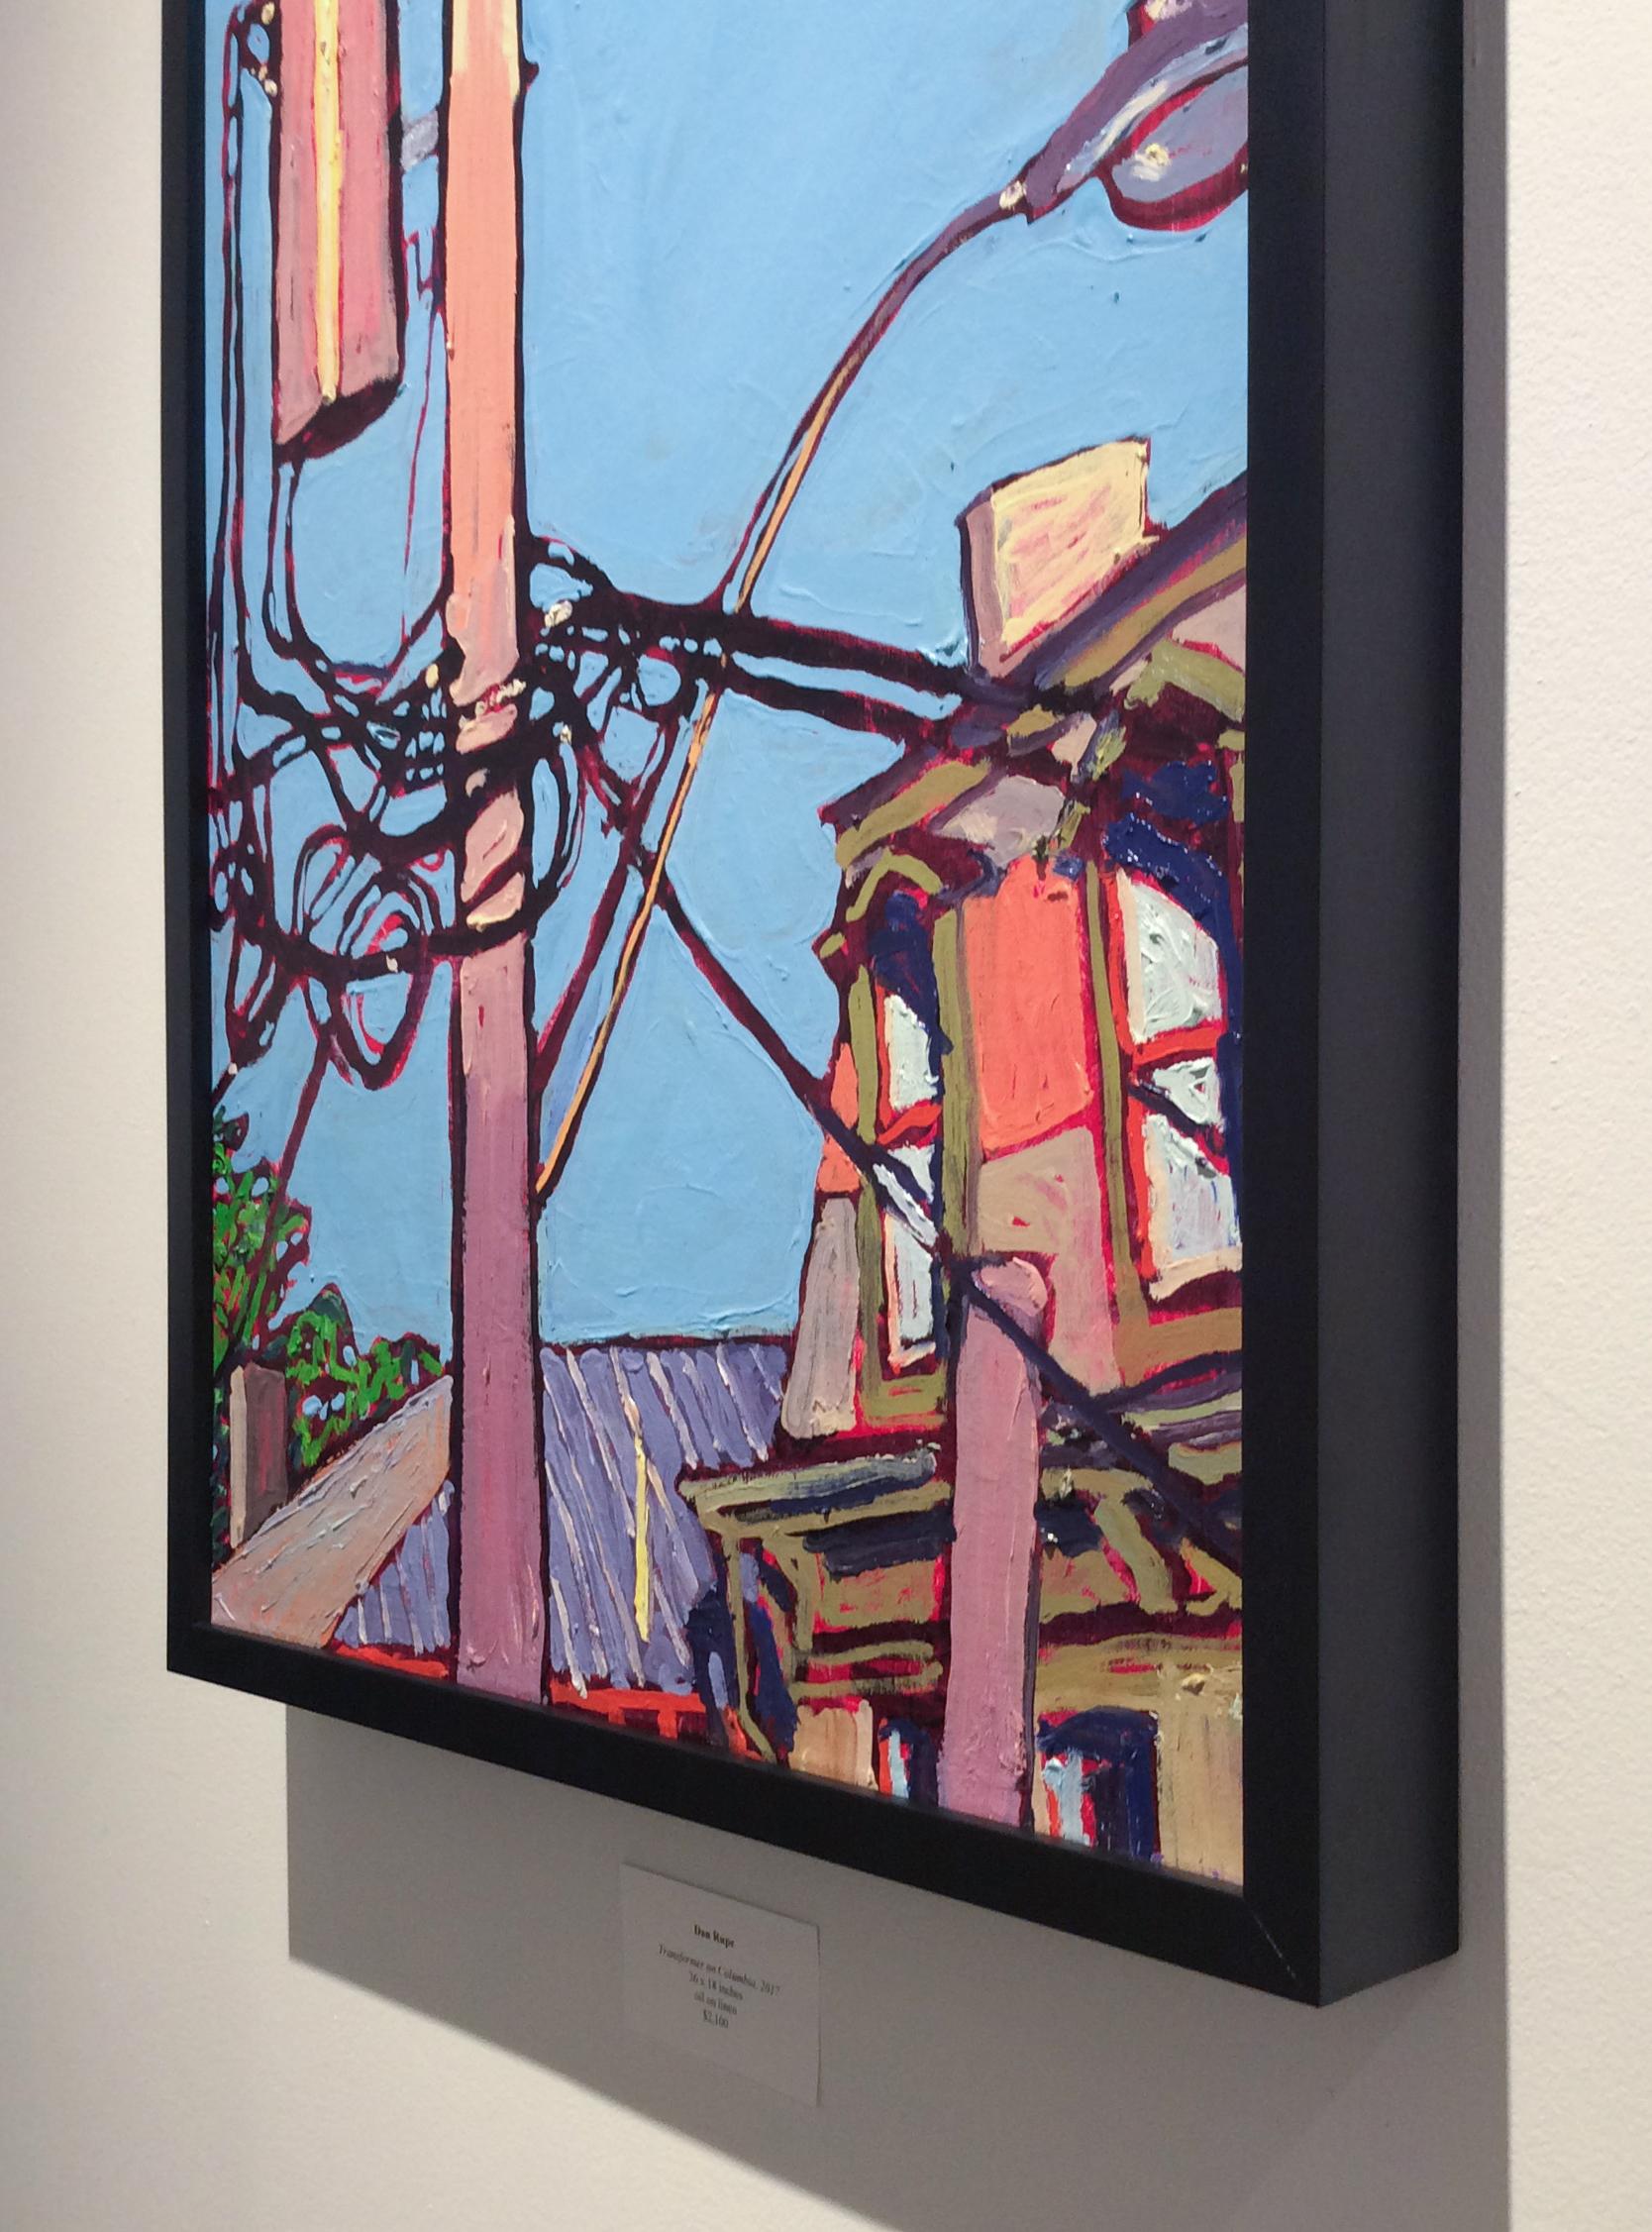 Transformers on Columbia: Fauvist Style Cityscape Painting with Blue Sky, Framed - Pink Landscape Painting by Dan Rupe